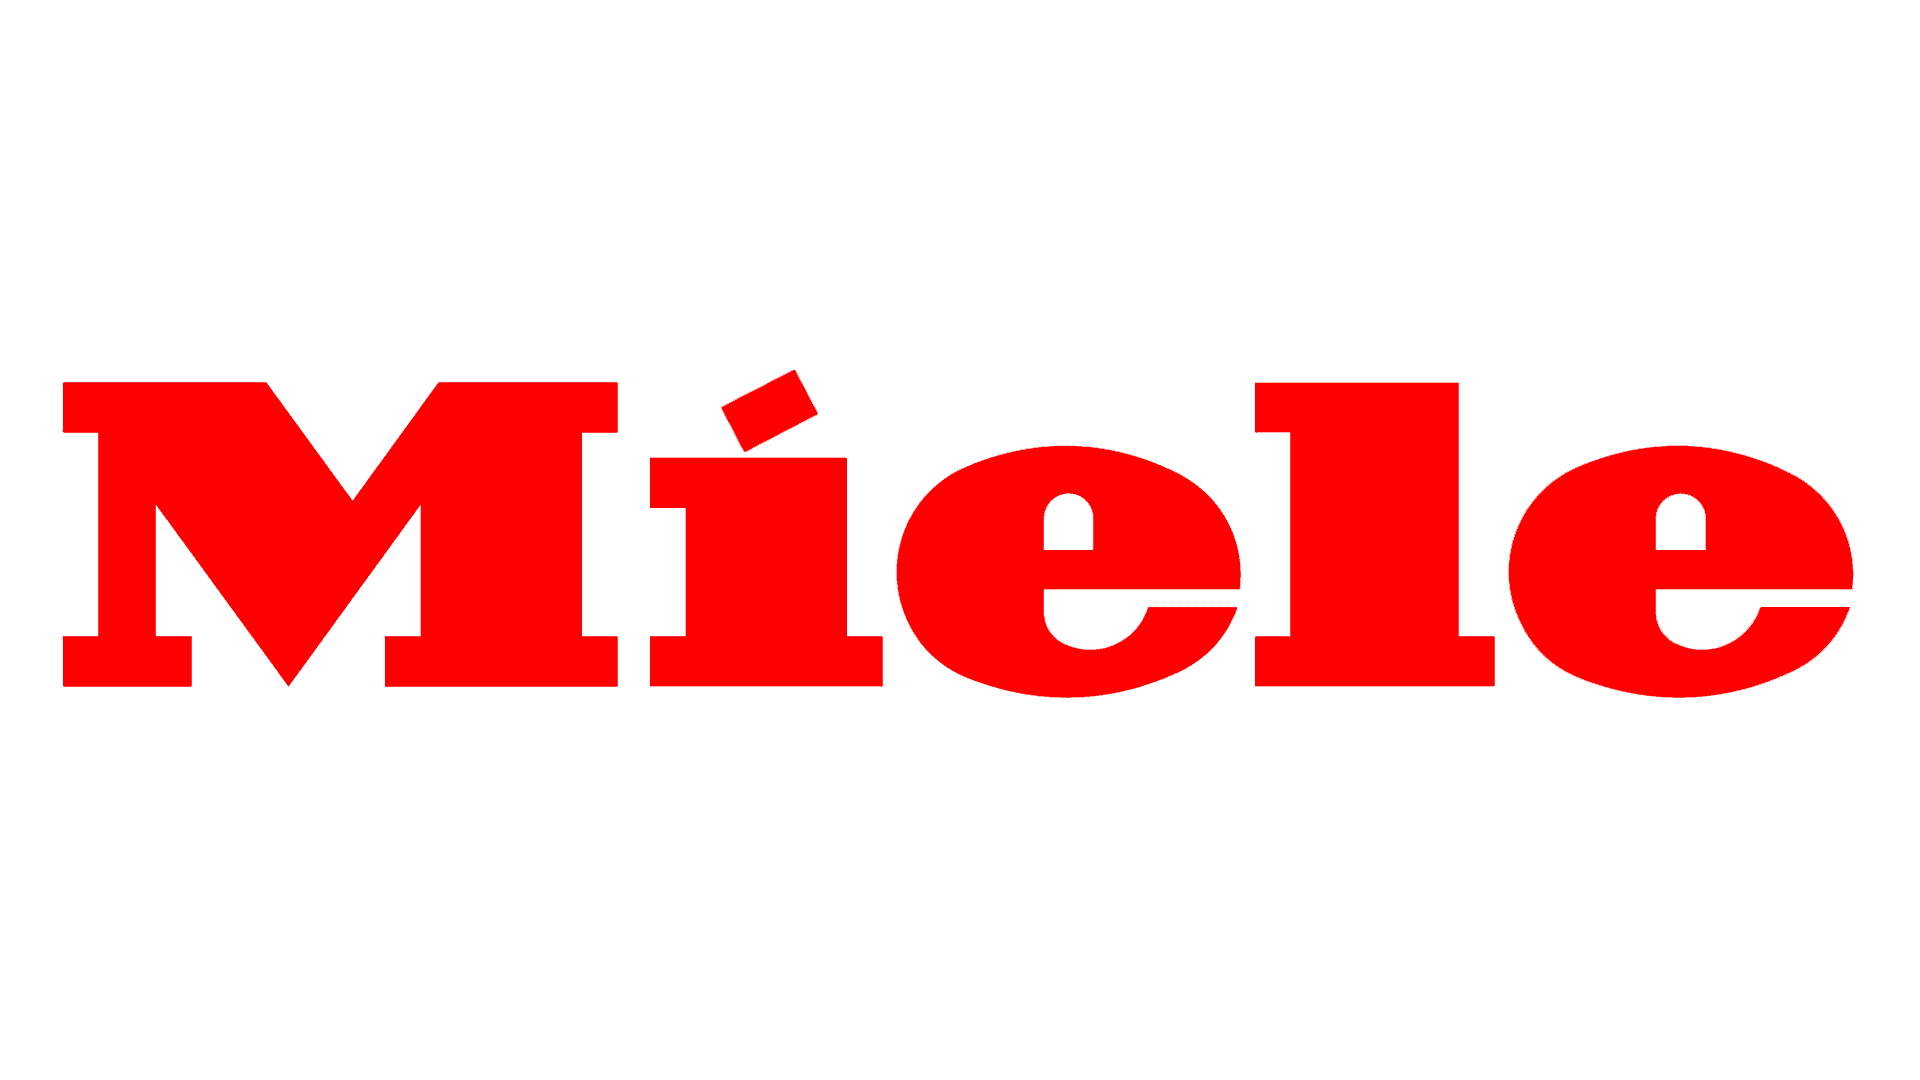 A red logo on a white background.